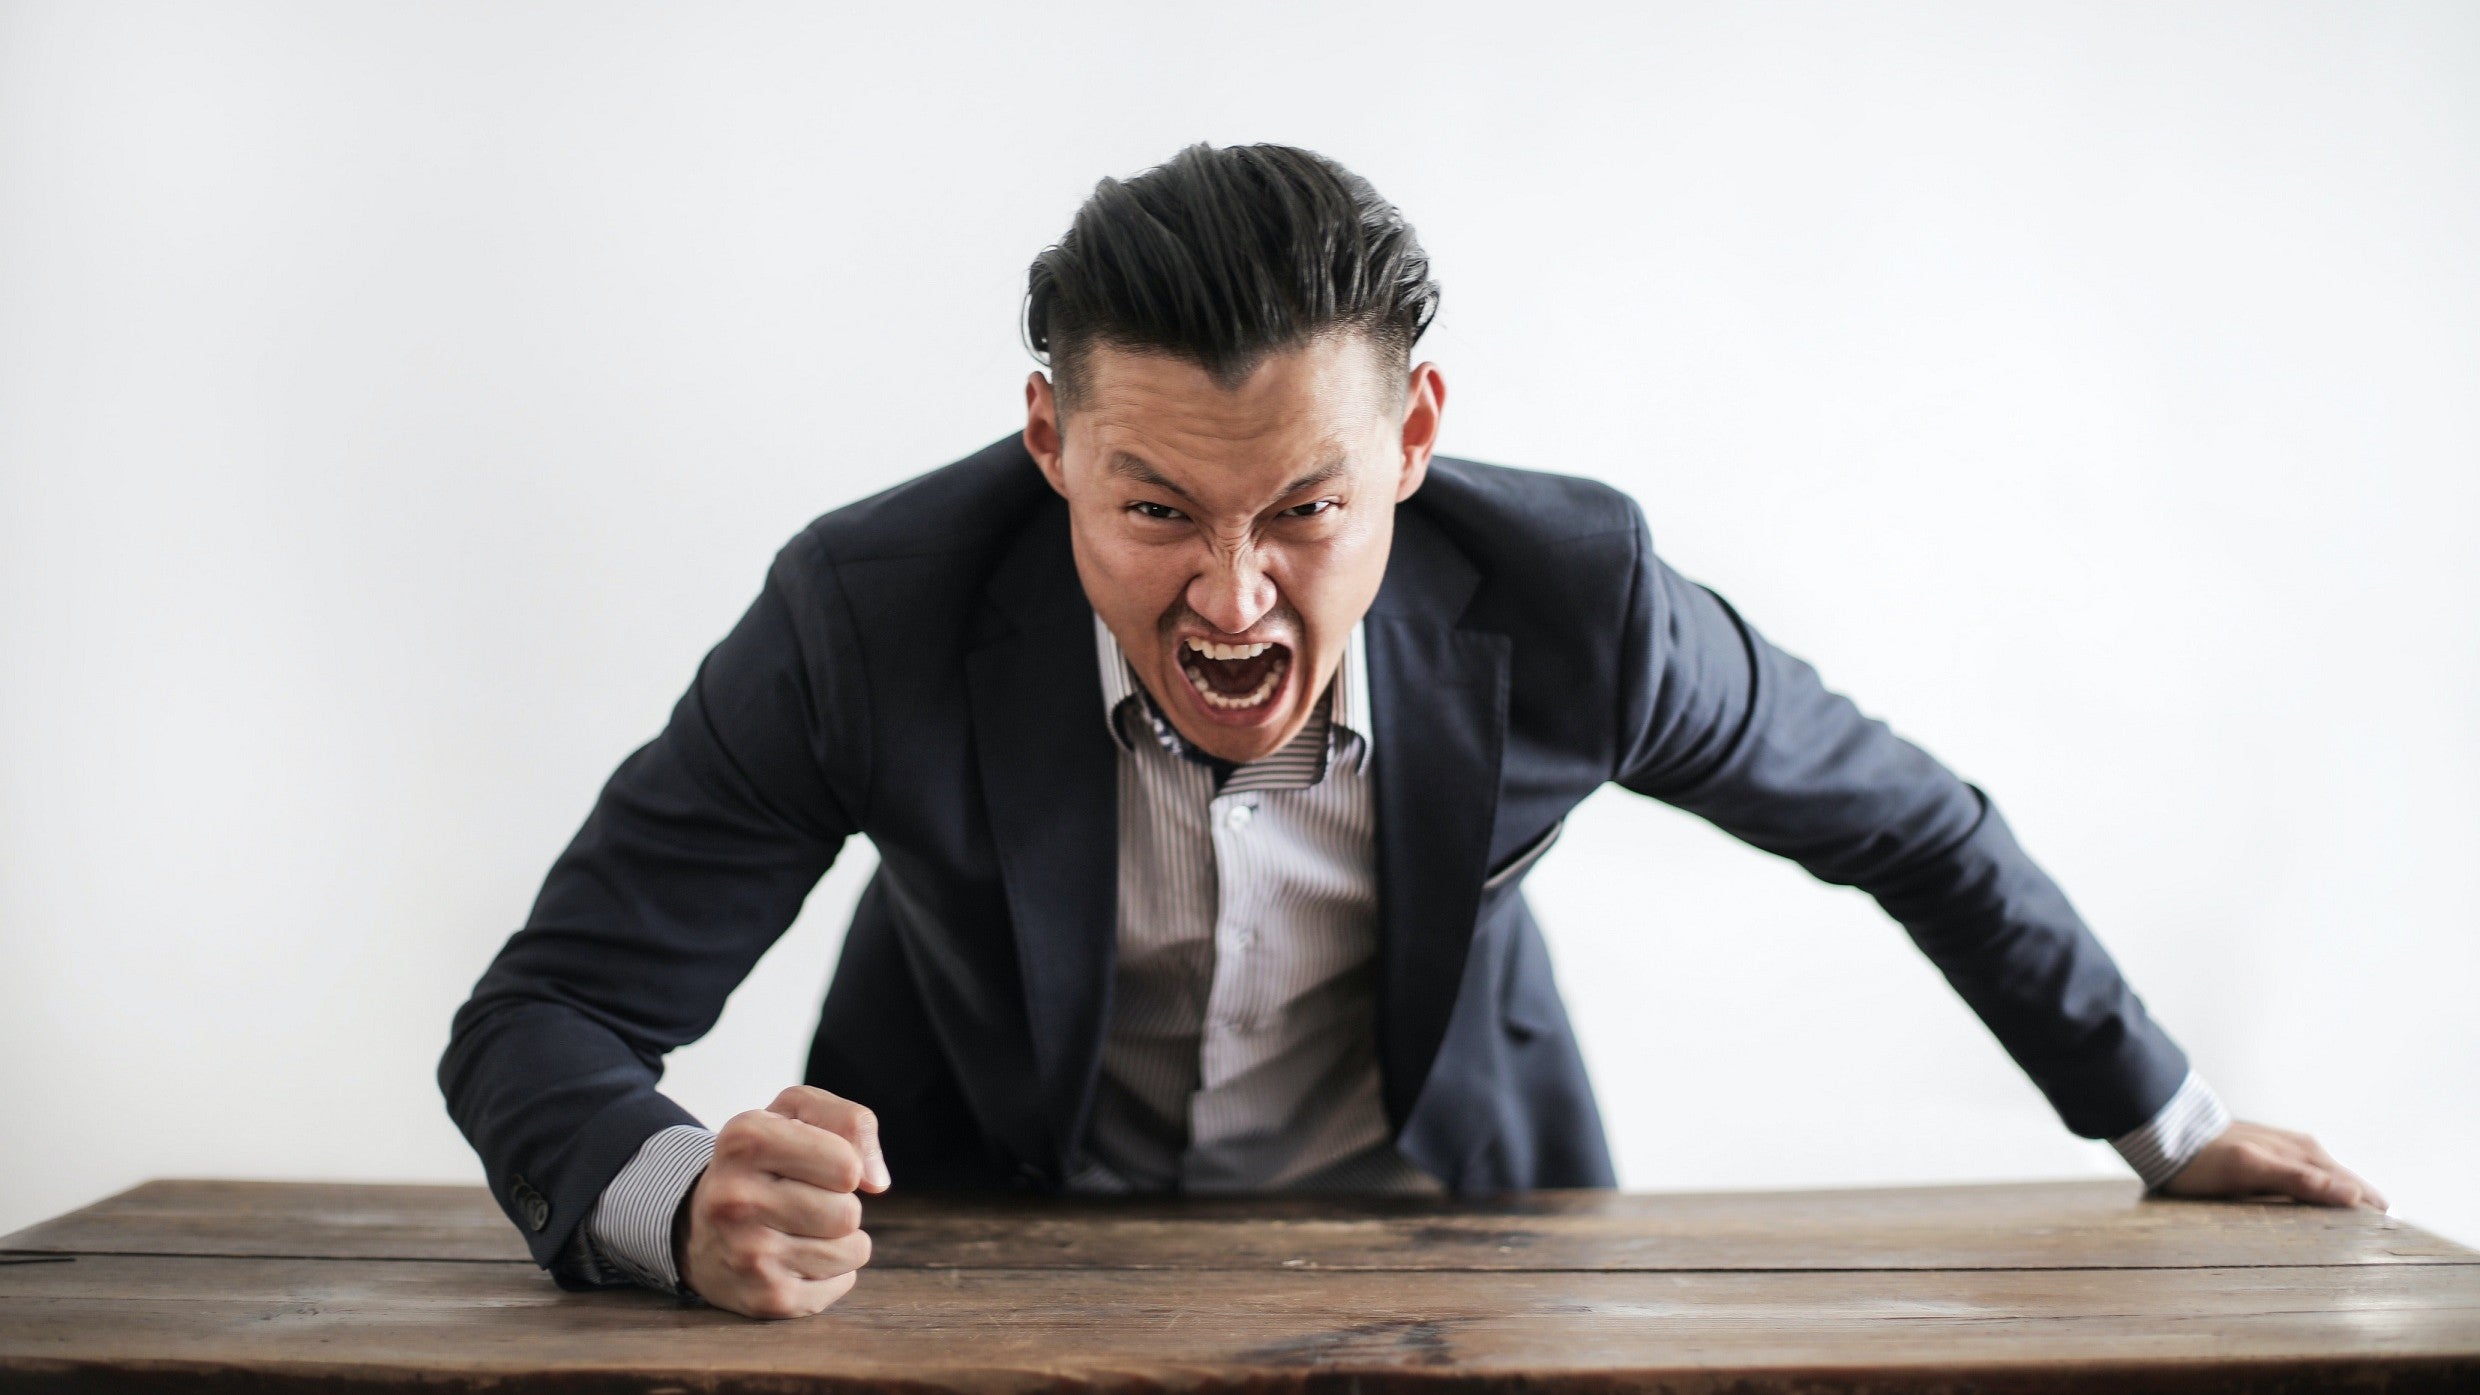 A screaming man in a suit bangs a desk